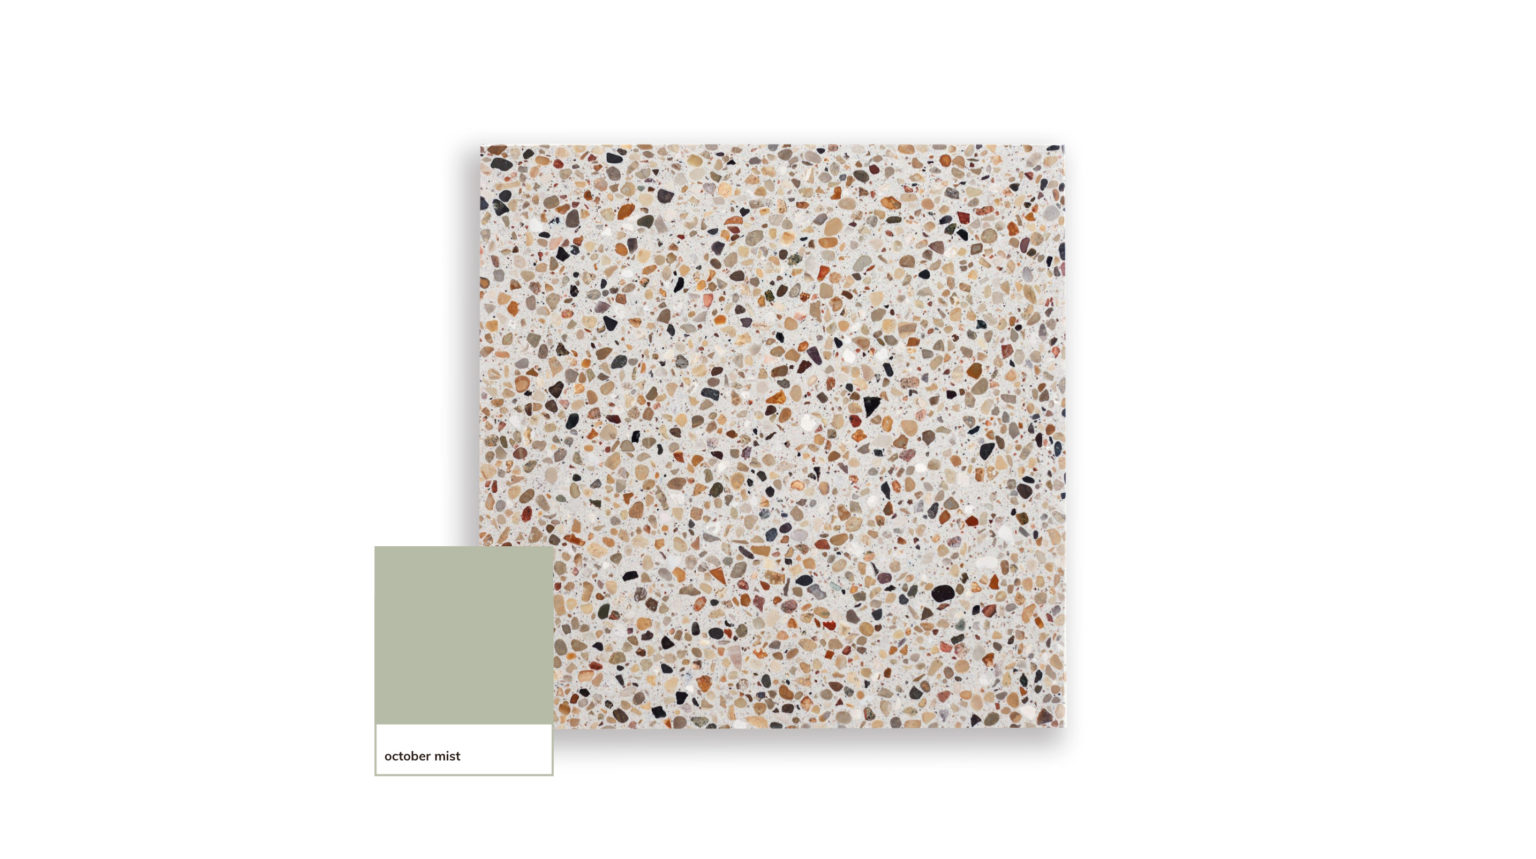 an image showing a pairing of Benjamin Moore’s October Mist with Forage Terrazzo in White